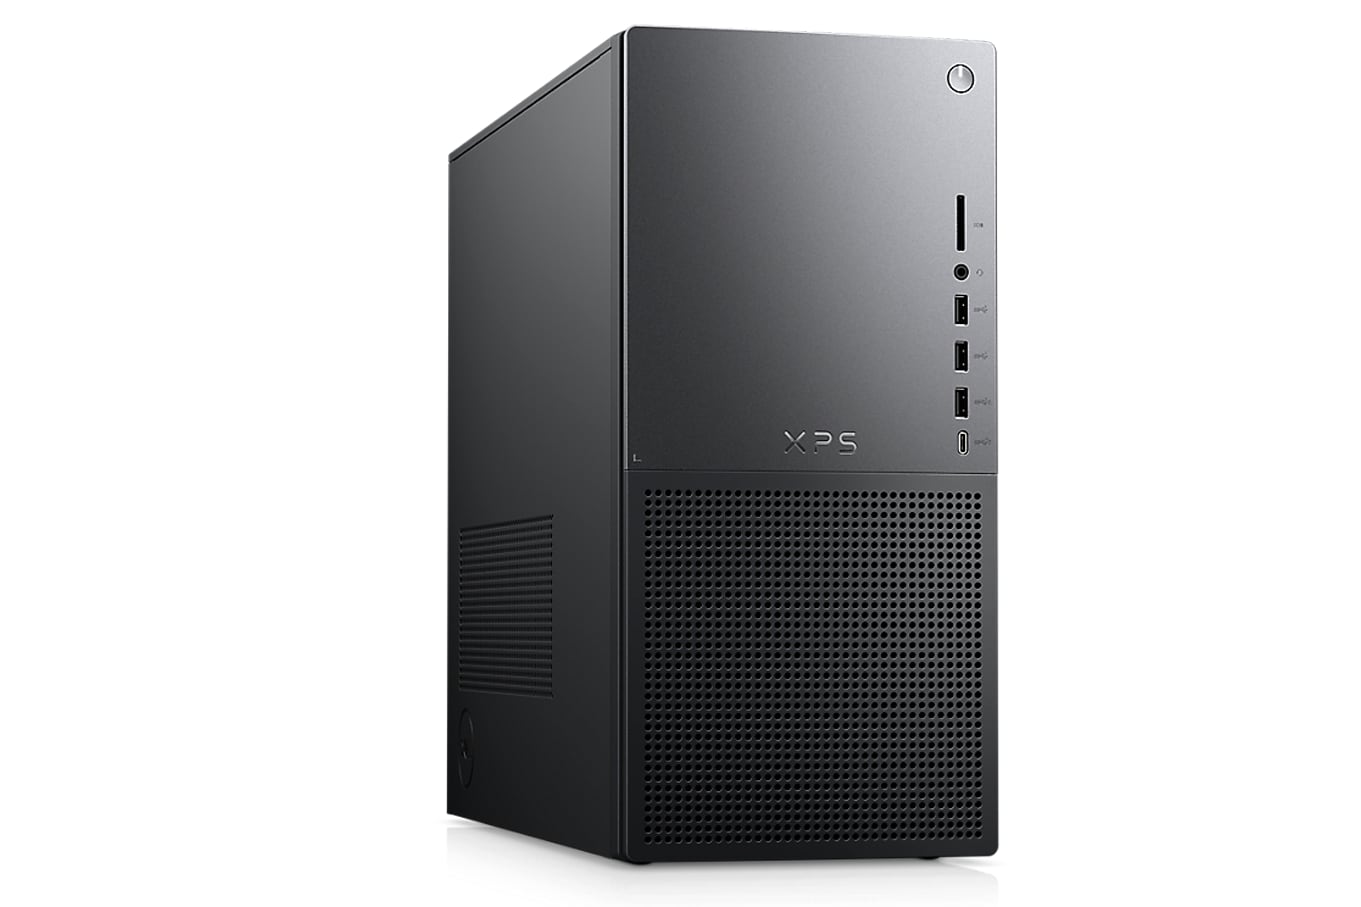 DELL デル Dell XPS 8960 Tower Desktop Computer 13th Gen Intel Core  i7-13700K 16-Core up to 5.40 GHz CPU, 64GB DDR5 RAM, 512GB NVMe SSD,  GeForce 送料無料